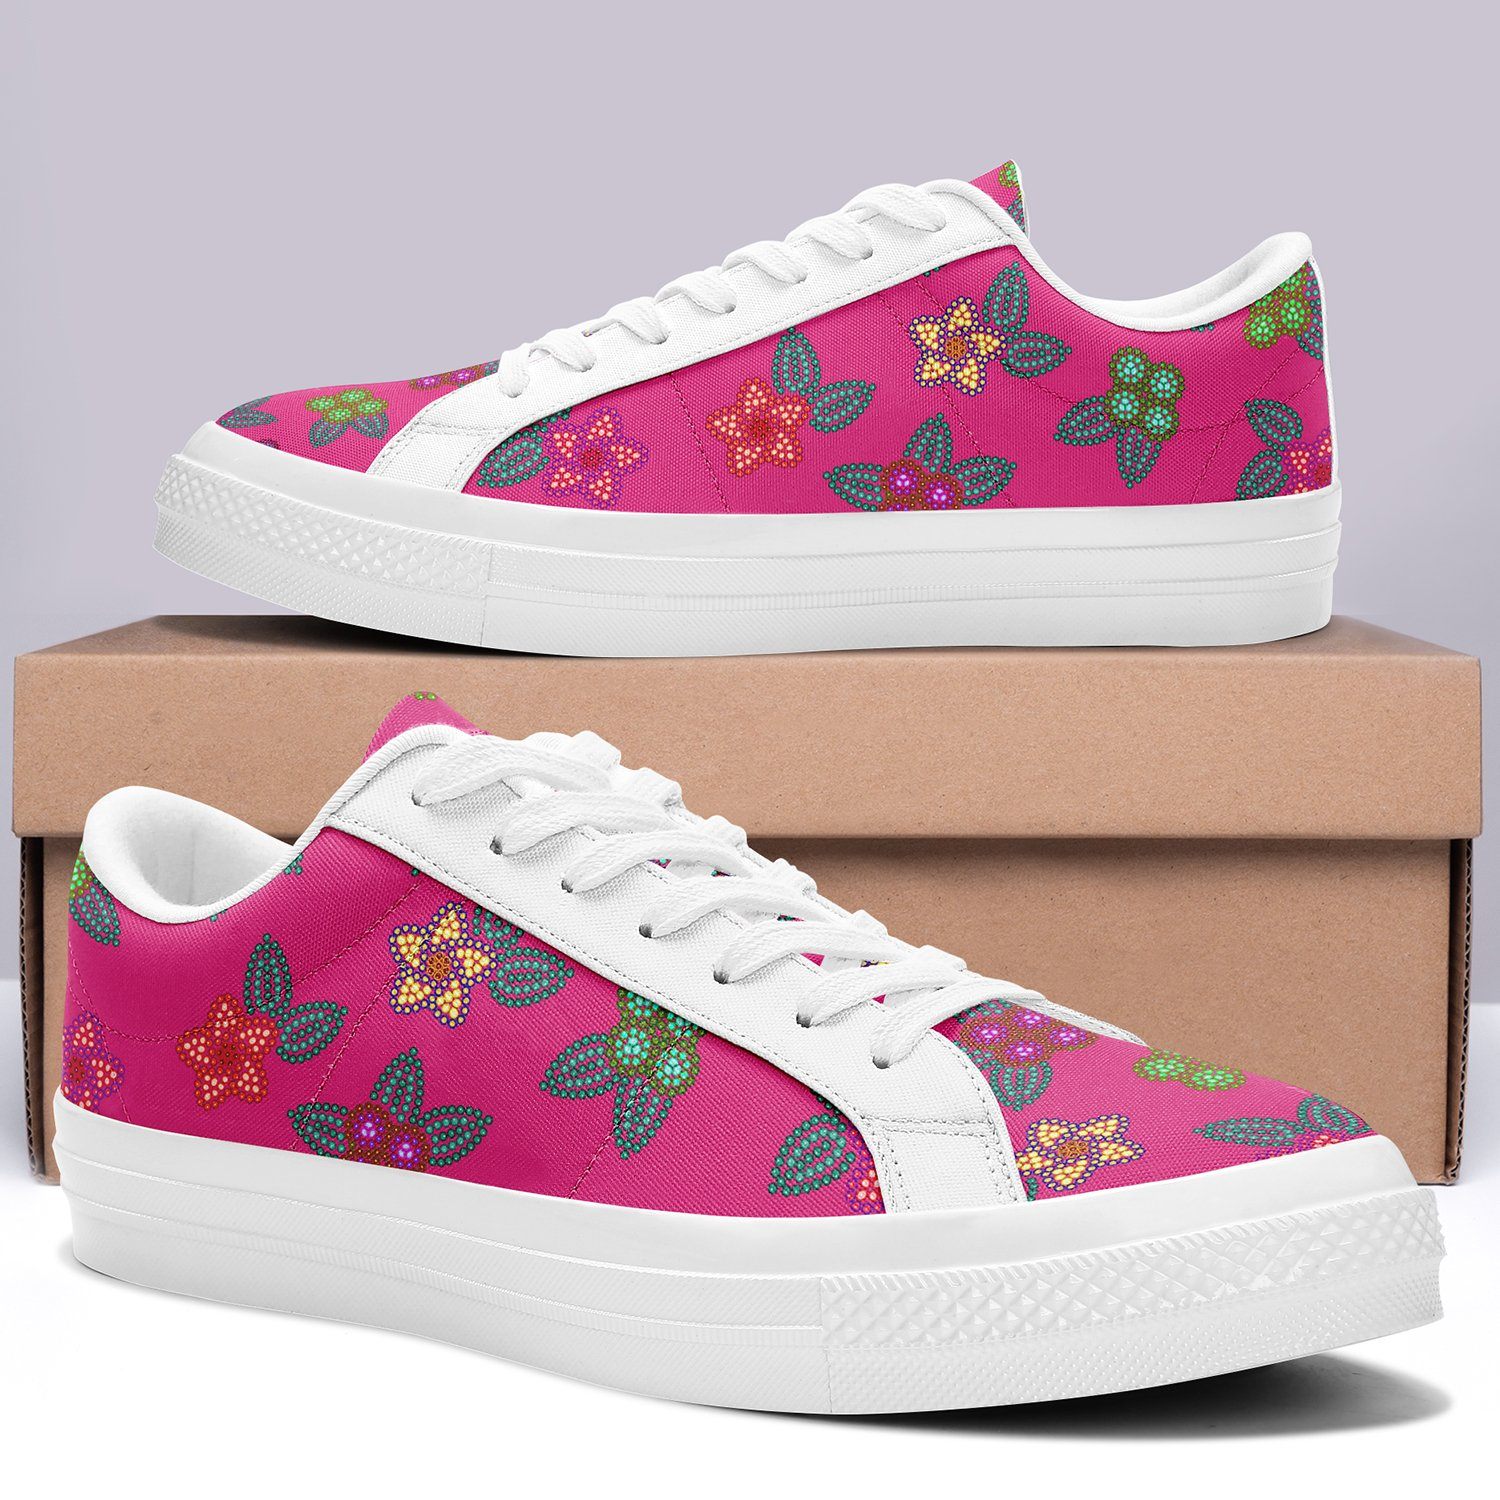 Berry Flowers Aapisi Low Top Canvas Shoes White Sole aapisi Herman 